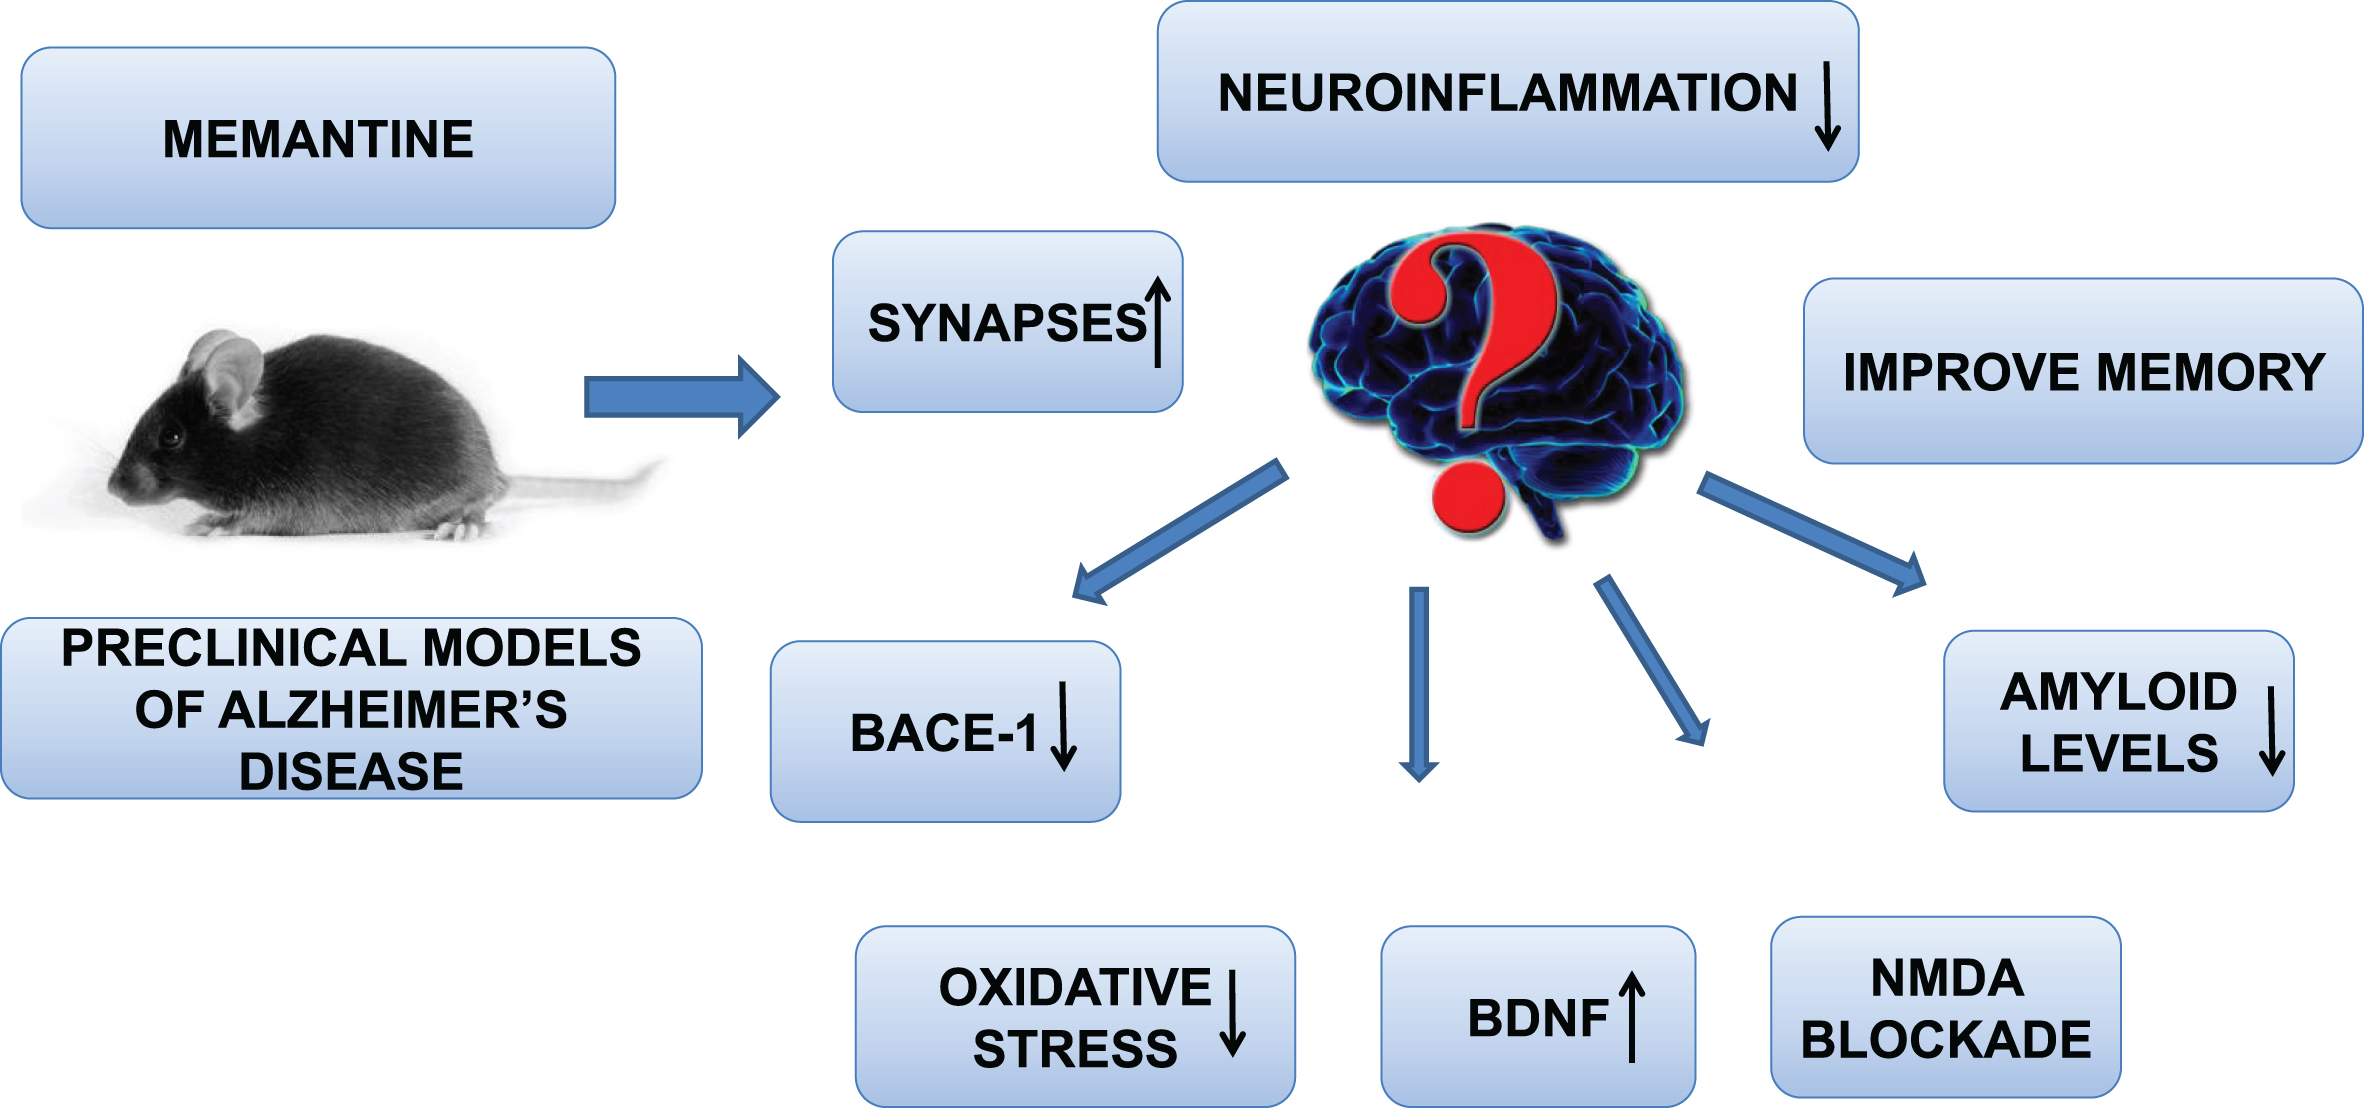 Memantine improve preclinical Alzheimer’s disease neuropathology though increasing BDNF levels, synapses, improving cognition, decreasing neuroinflammation, BACE-1 blockade, and NMDA receptor inhibition.